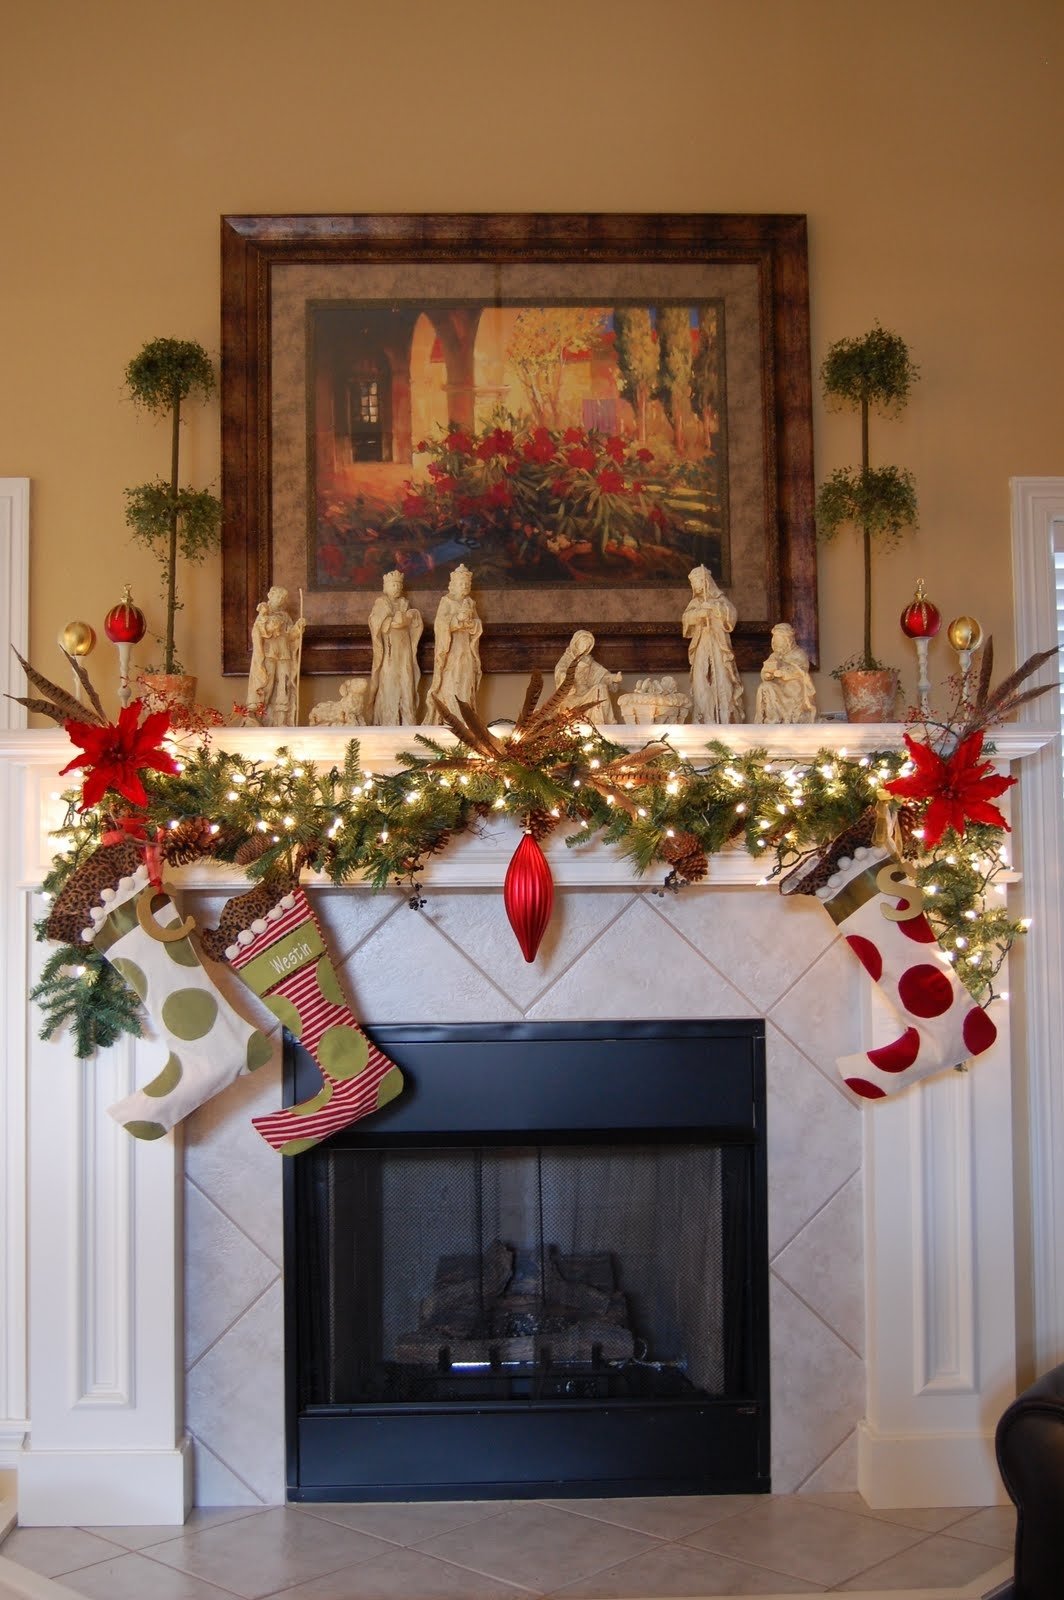 10 Pretty Fireplace Mantel Christmas Decorating Ideas Photos fireplace mantel holiday decorating ideas amys office 2024